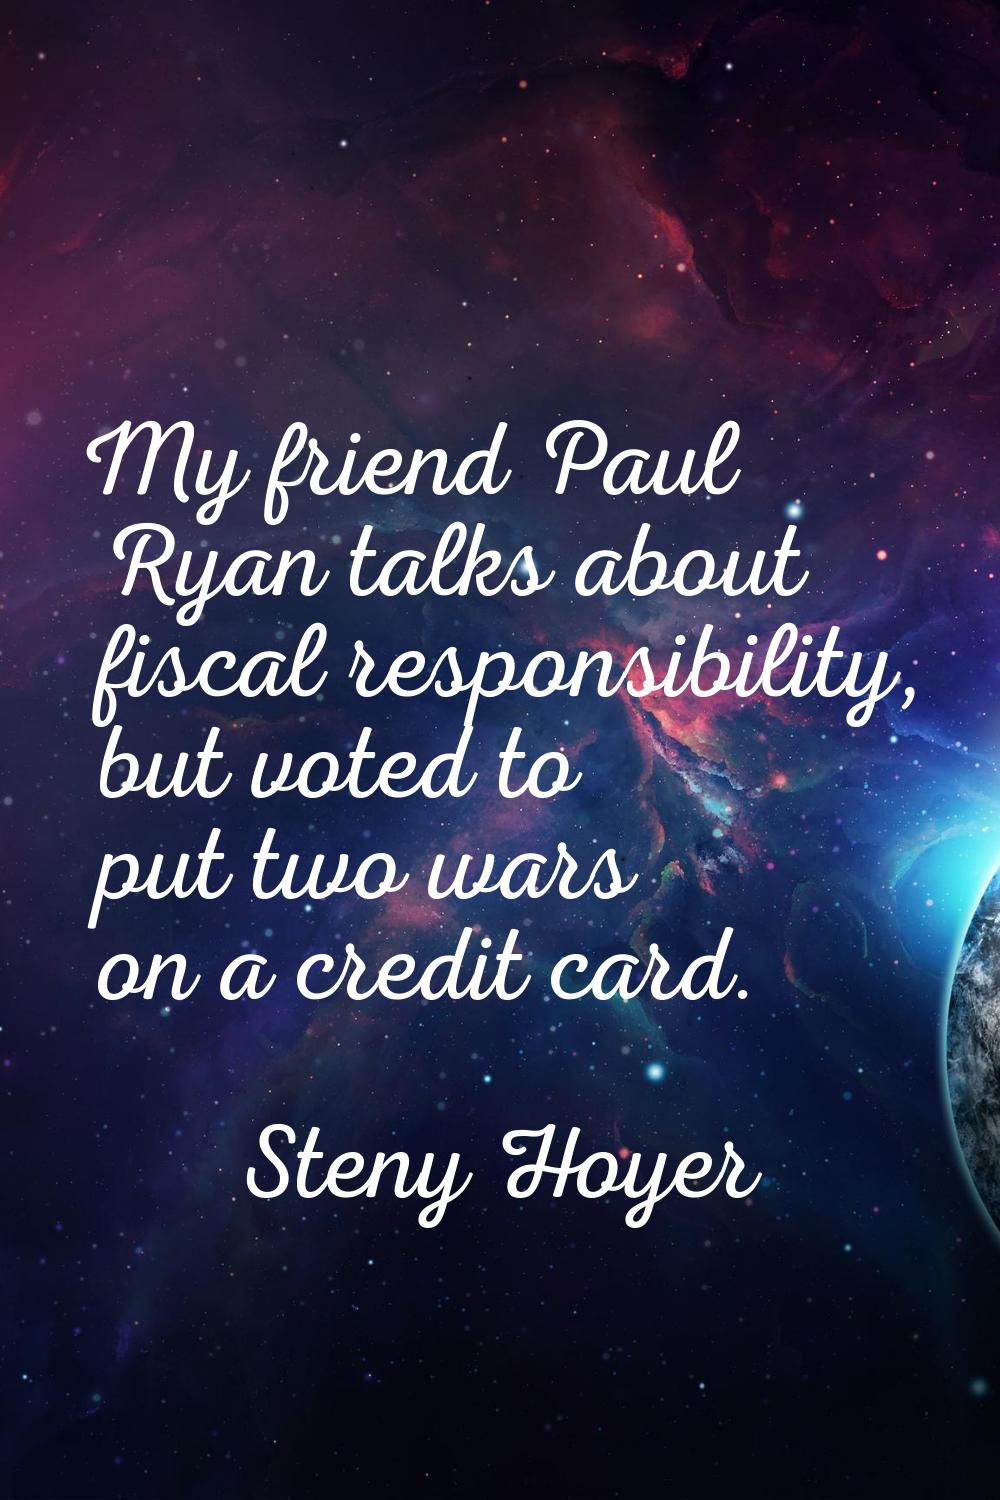 My friend Paul Ryan talks about fiscal responsibility, but voted to put two wars on a credit card.